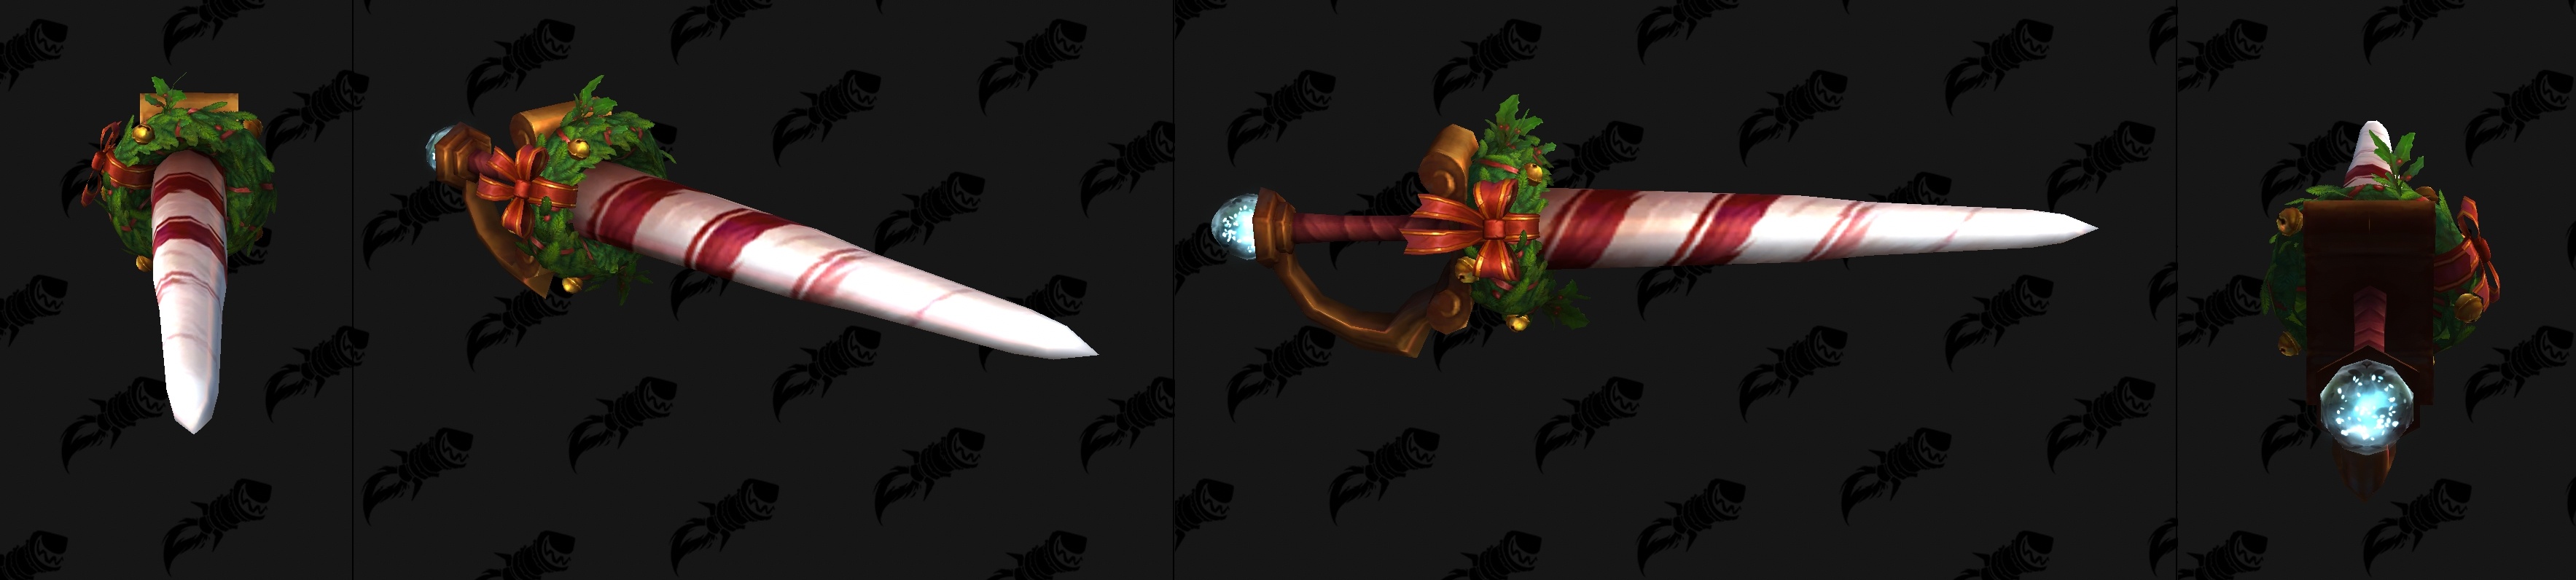 December trading post items "datamined" General Discussion World of